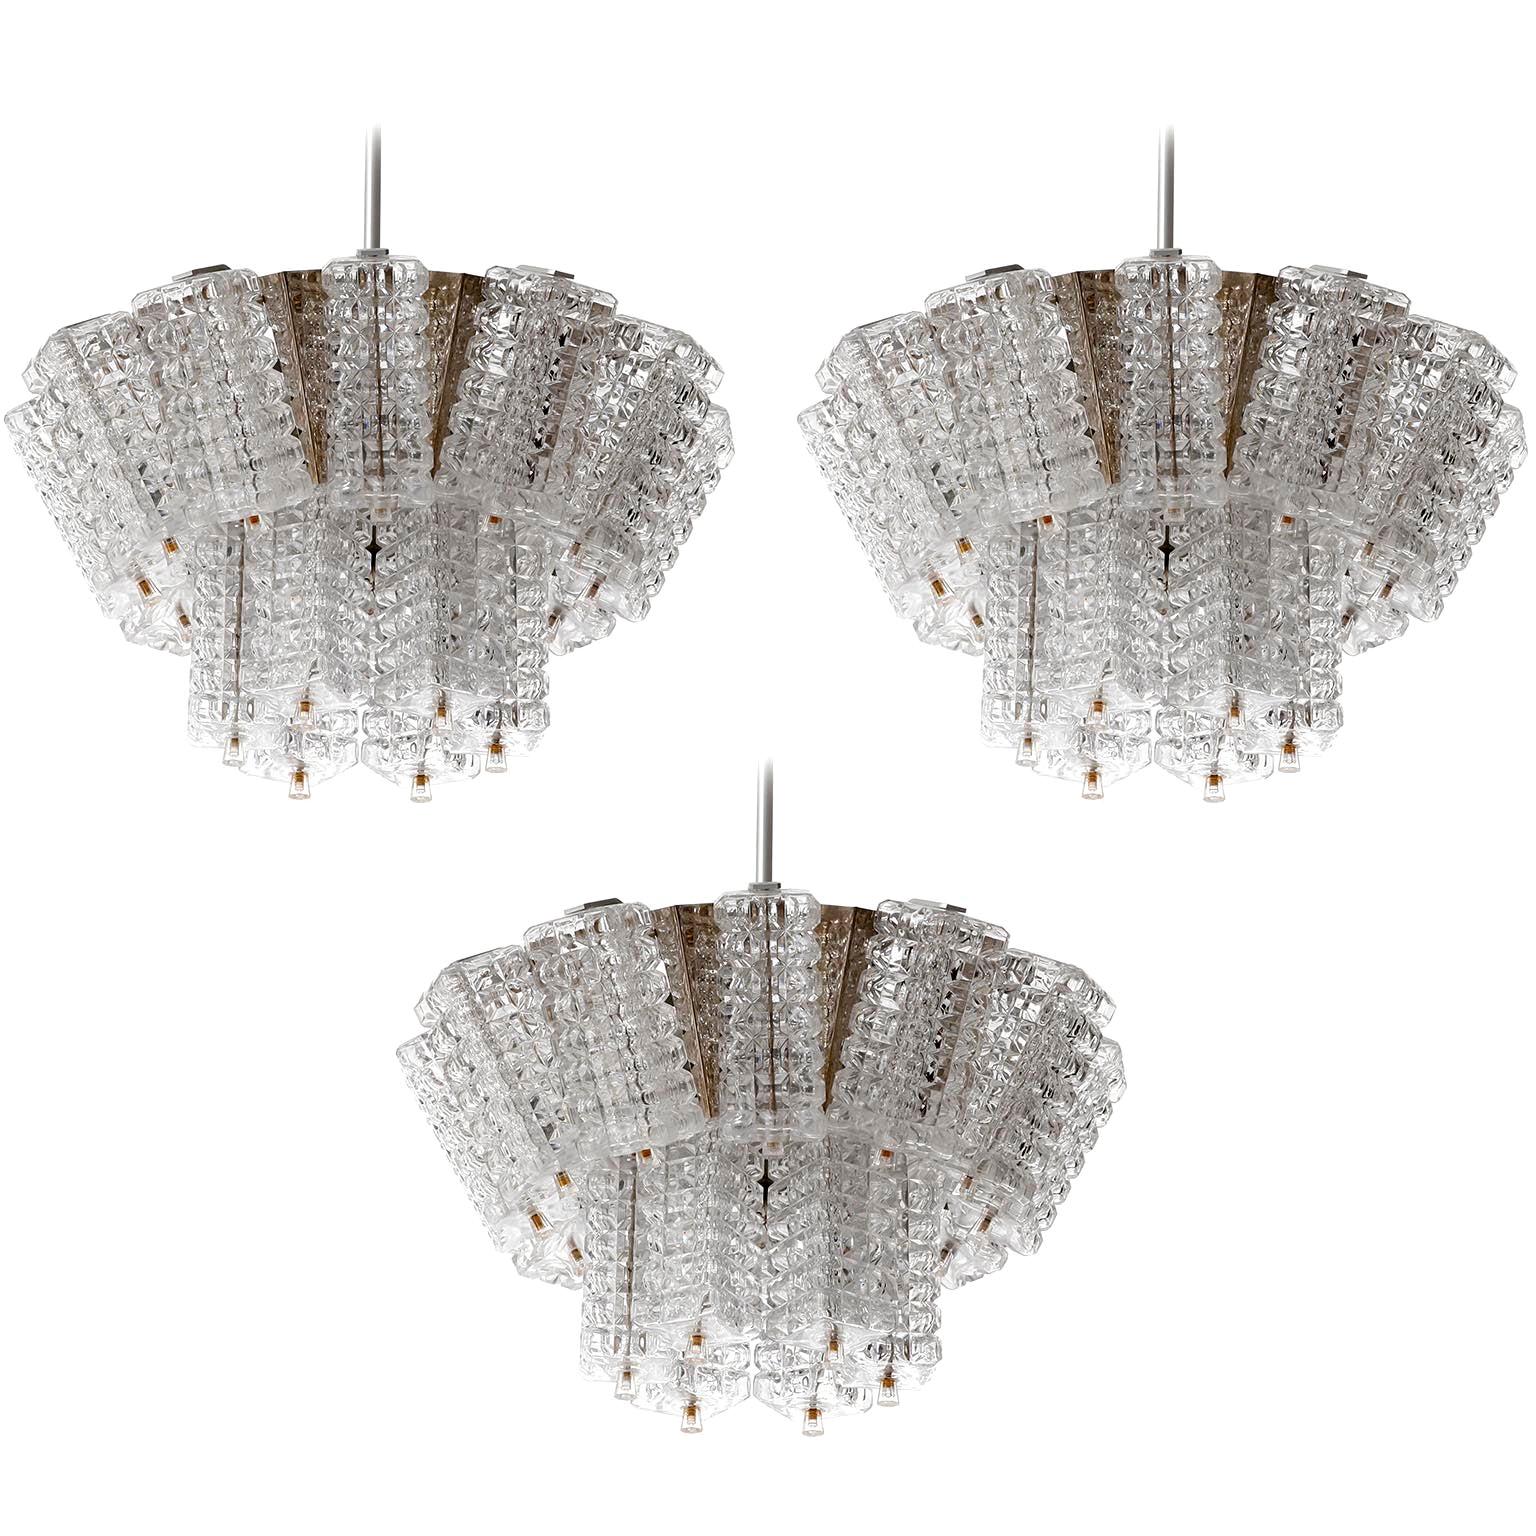 One of Three Chandeliers Pendant Lights by Austrolux, Chrome Glass, Austria 1960 For Sale